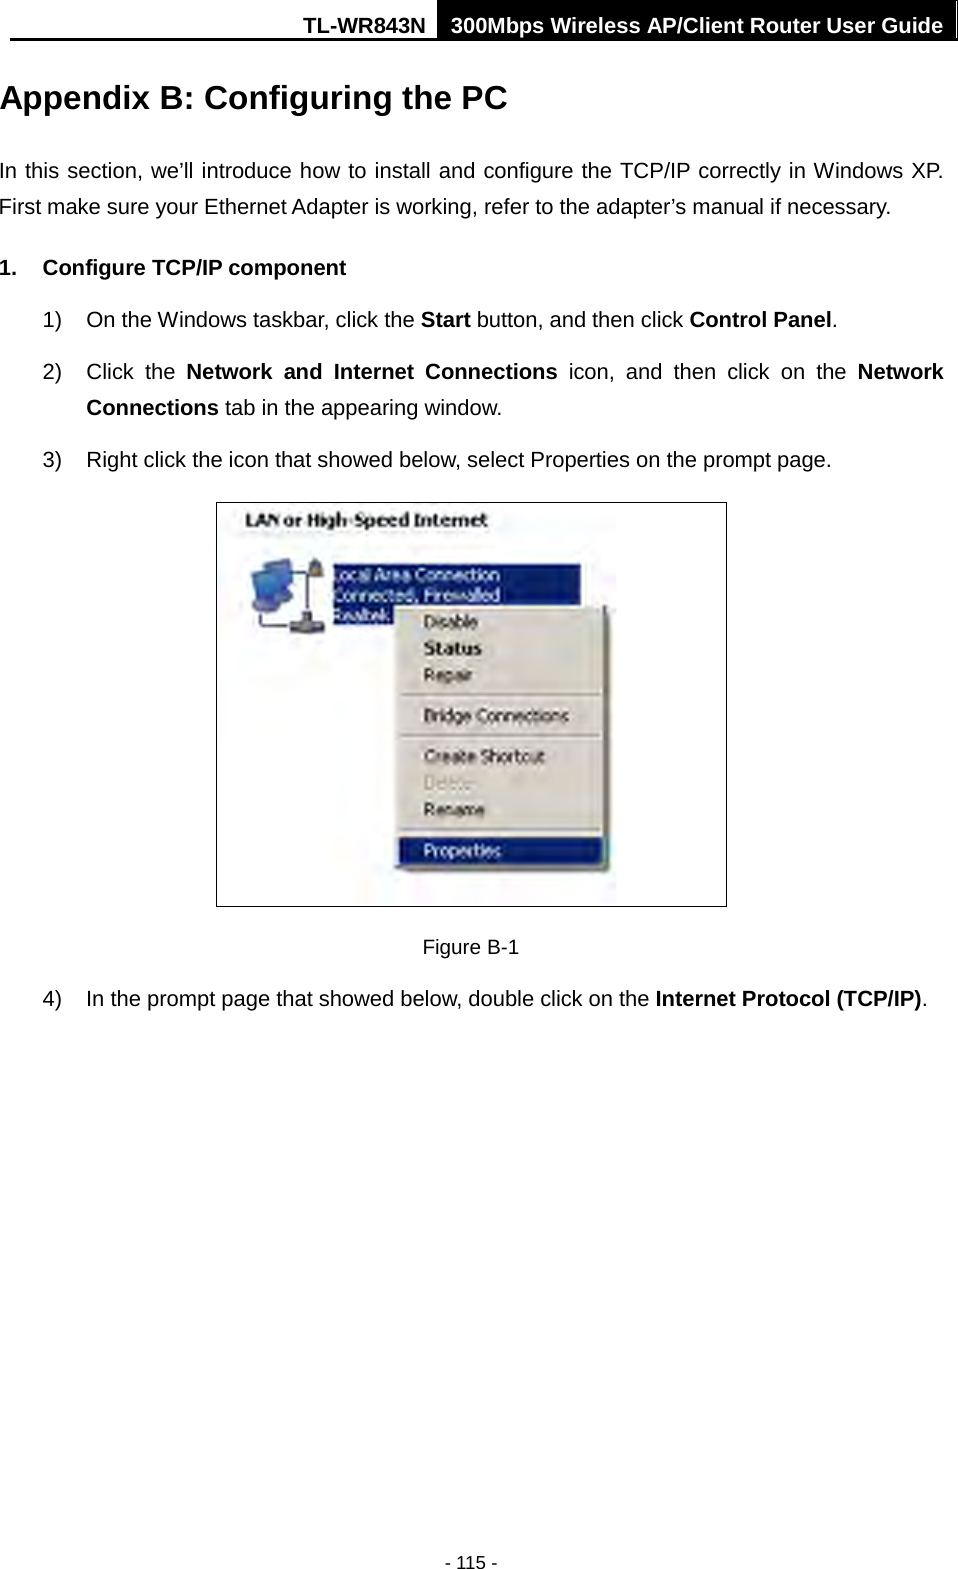 TL-WR843N 300Mbps Wireless AP/Client Router User Guide - 115 - Appendix B: Configuring the PC In this section, we’ll introduce how to install and configure the TCP/IP correctly in Windows XP. First make sure your Ethernet Adapter is working, refer to the adapter’s manual if necessary. 1. Configure TCP/IP component1) On the Windows taskbar, click the Start button, and then click Control Panel.2) Click  the  Network and Internet Connections icon, and then click on the NetworkConnections tab in the appearing window.3) Right click the icon that showed below, select Properties on the prompt page.Figure B-1 4) In the prompt page that showed below, double click on the Internet Protocol (TCP/IP).